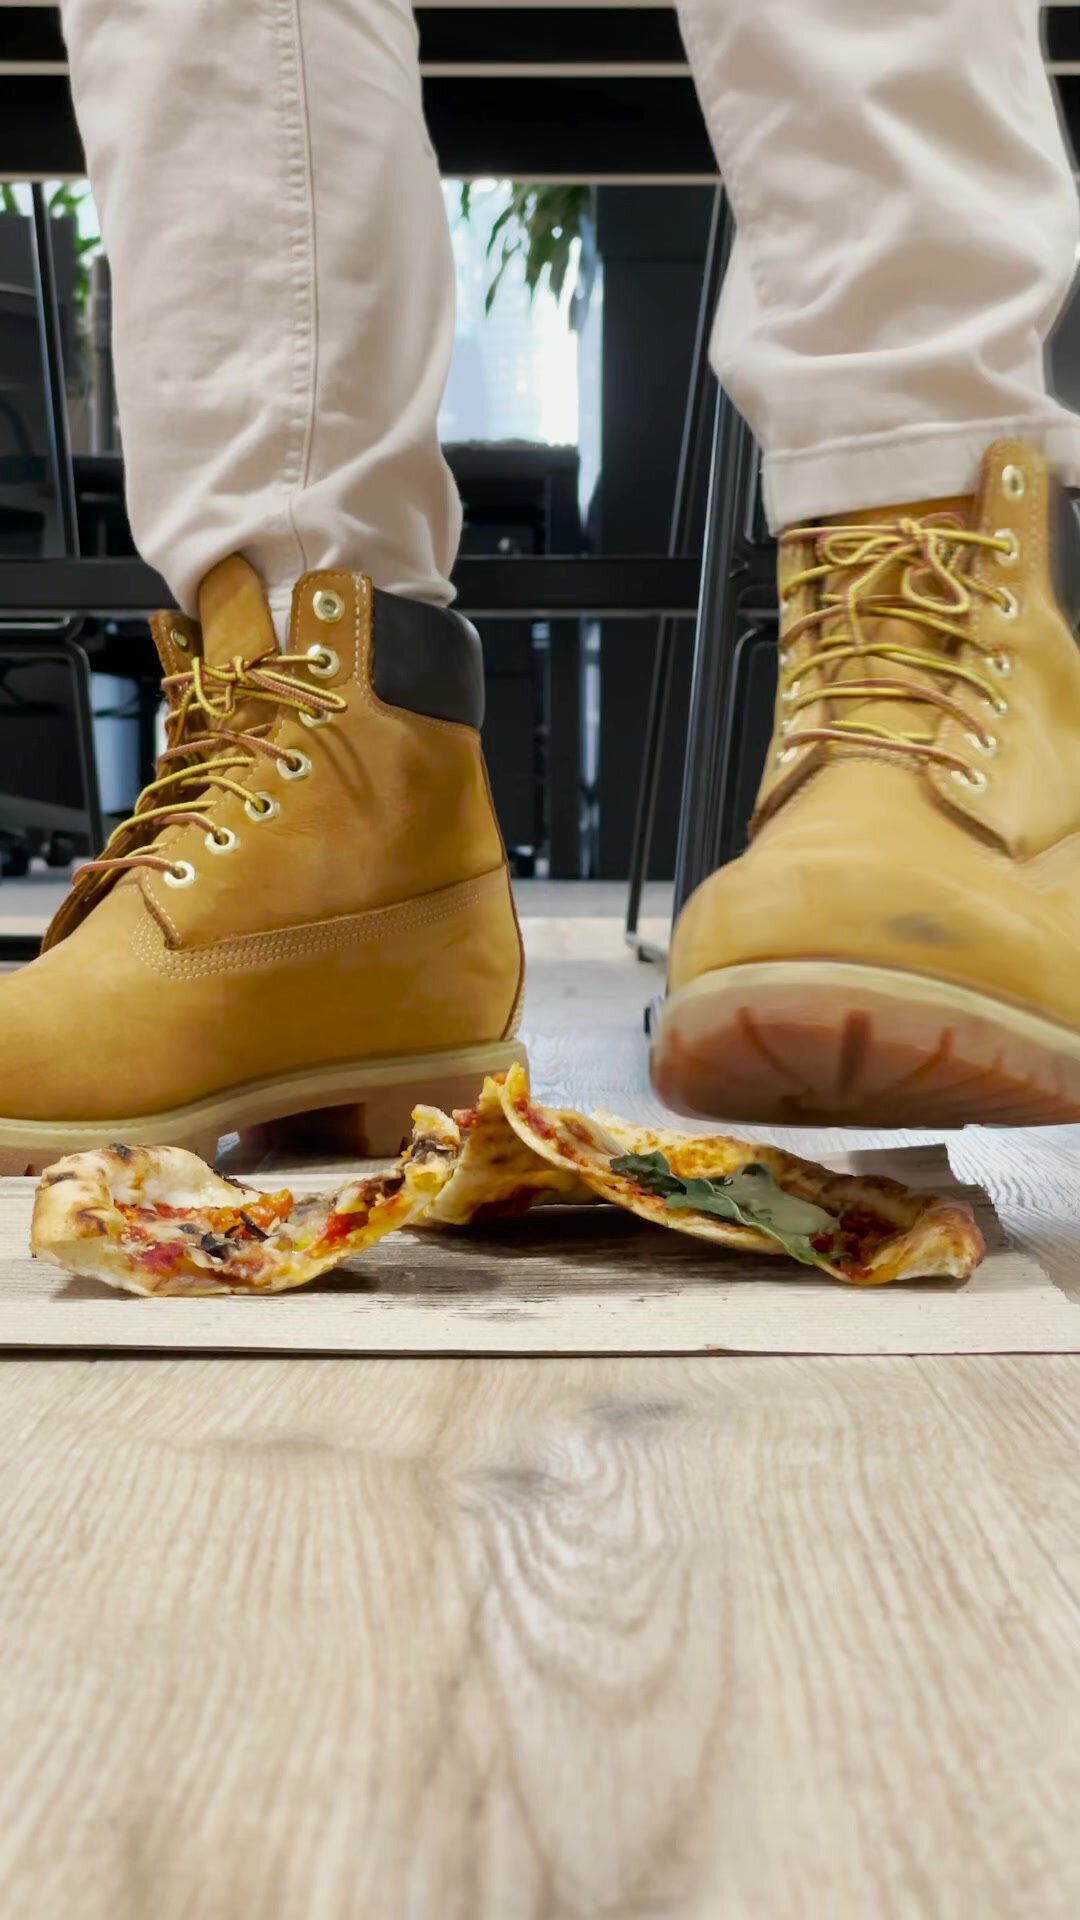 Crush old pizza in my timbs